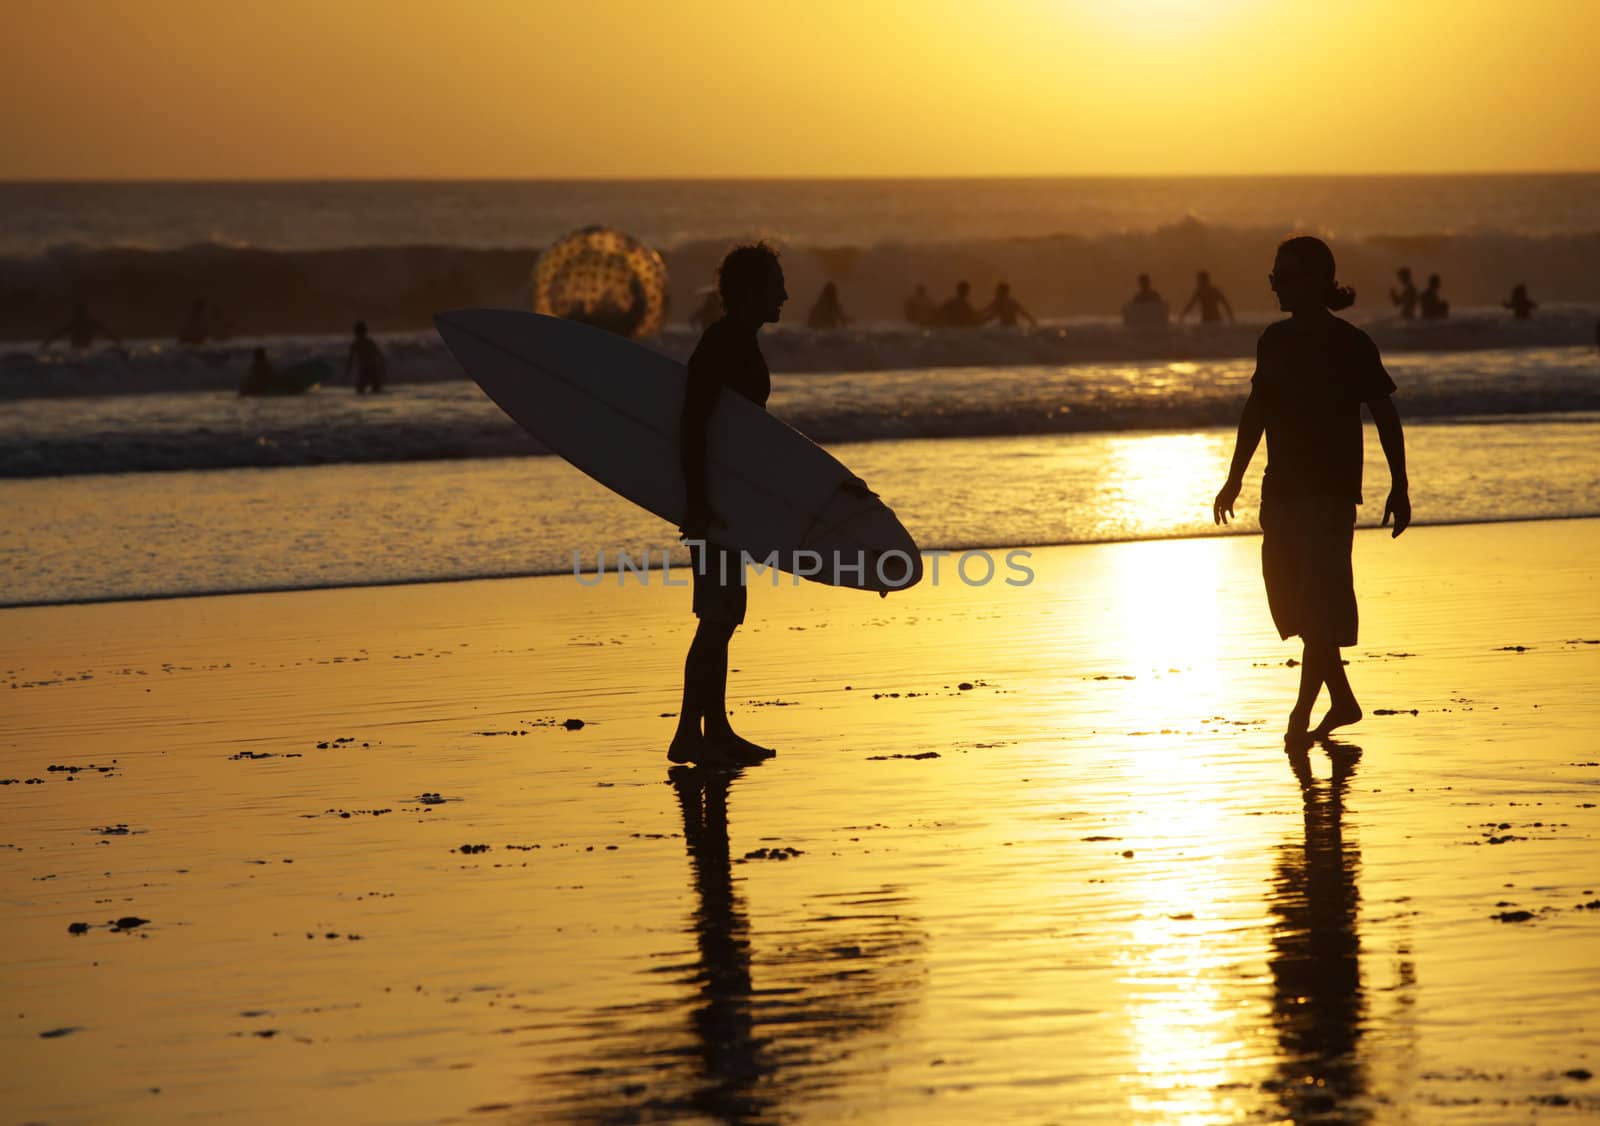 Silhouette of surfers in golden sunset light. Bali